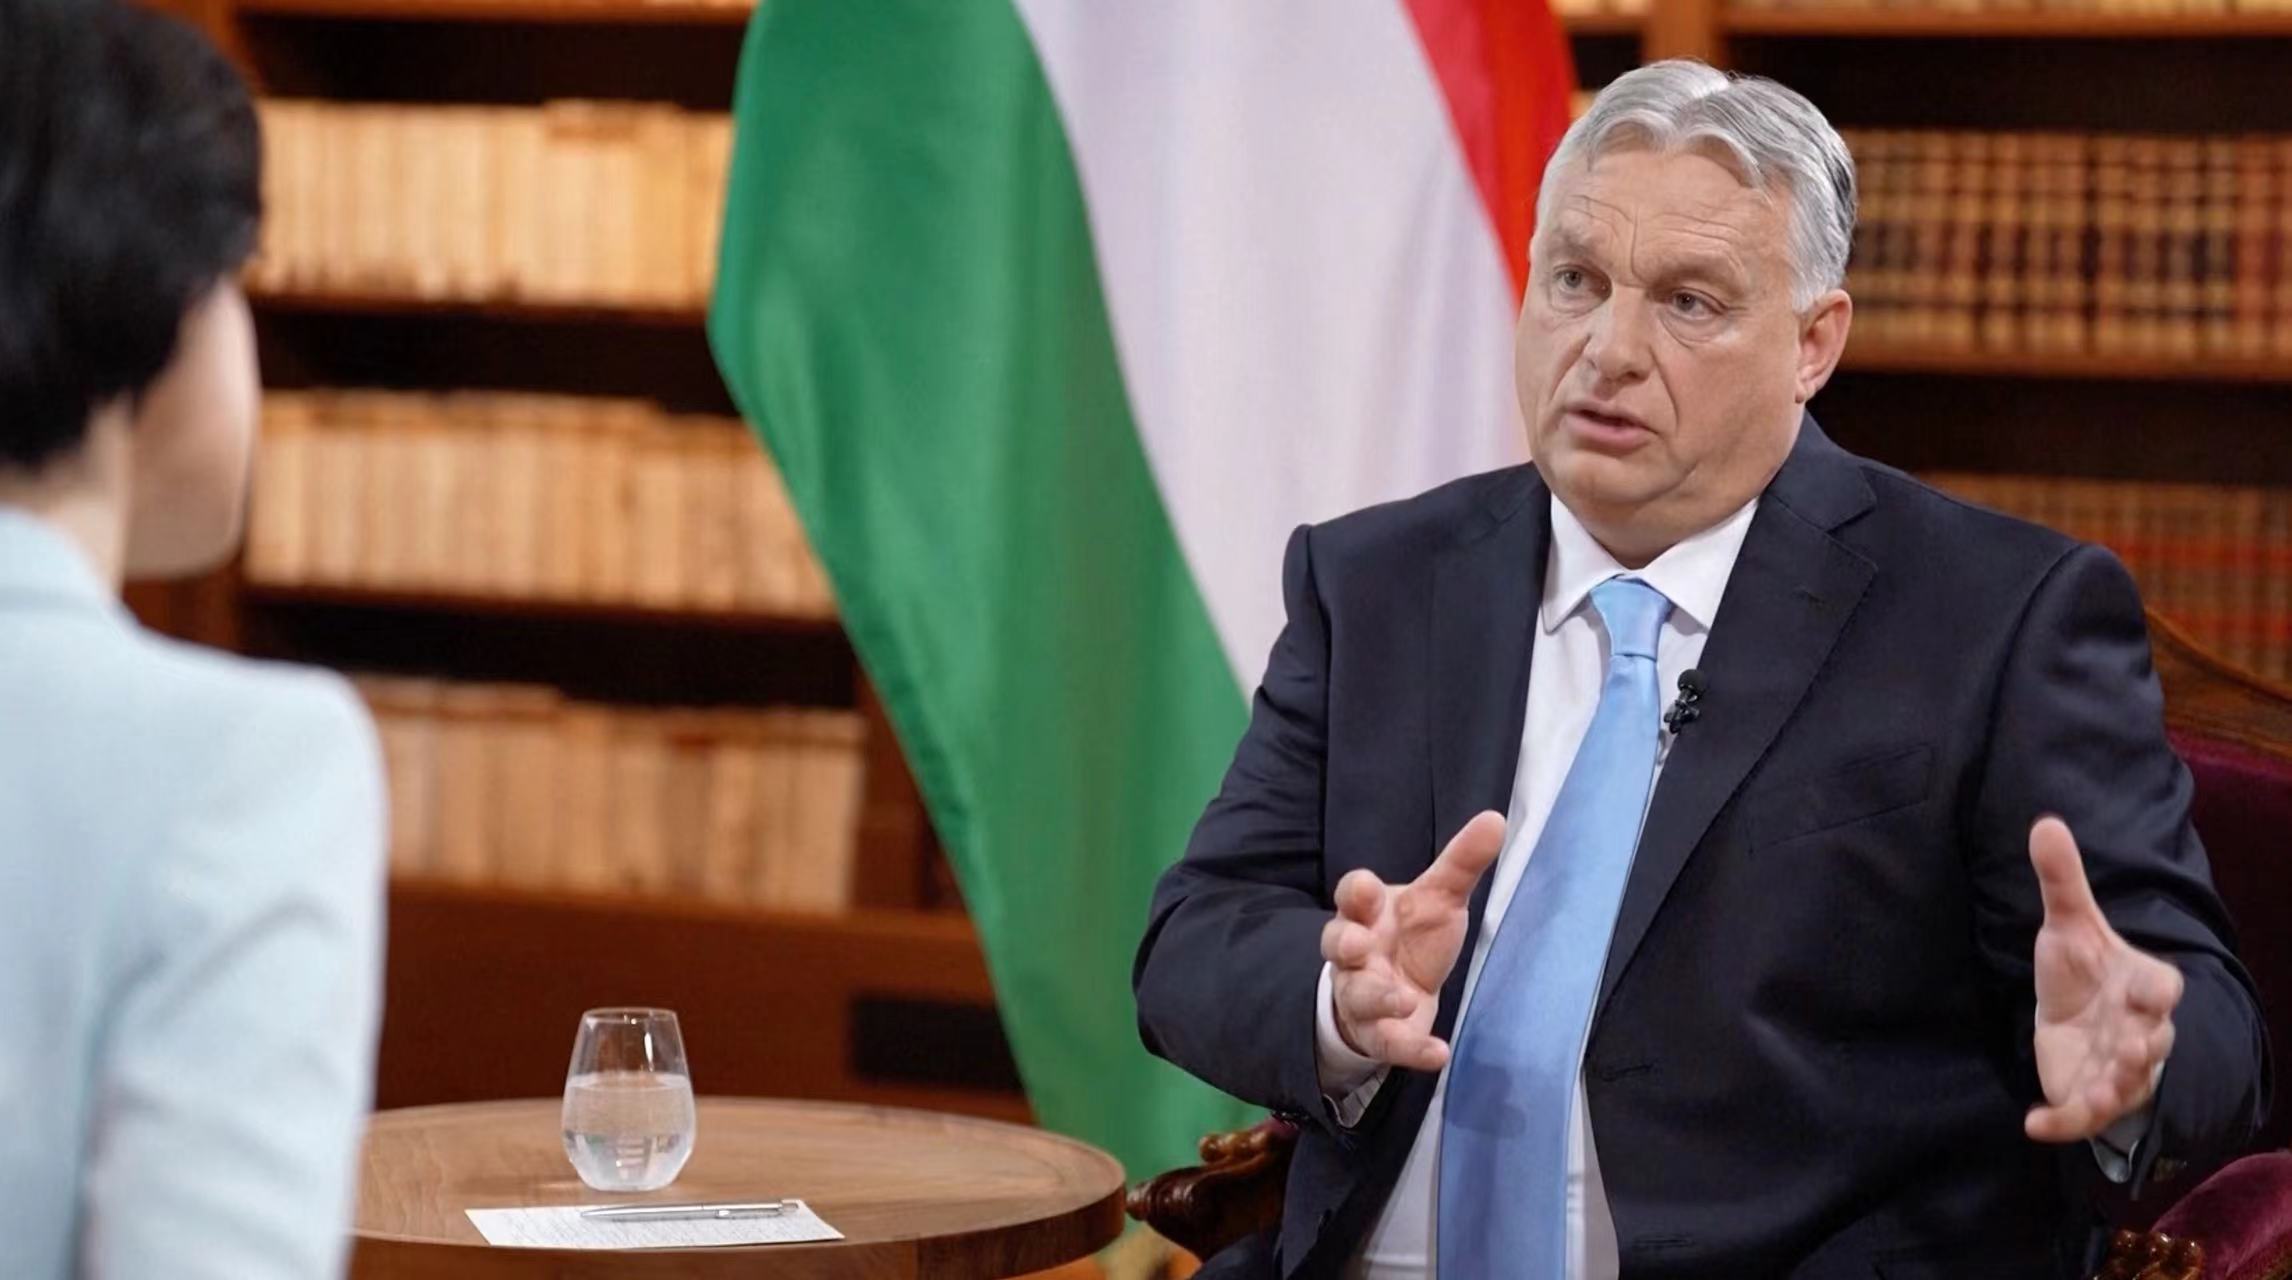 Xi's visit to Europe at right time, necessary: Hungarian PM